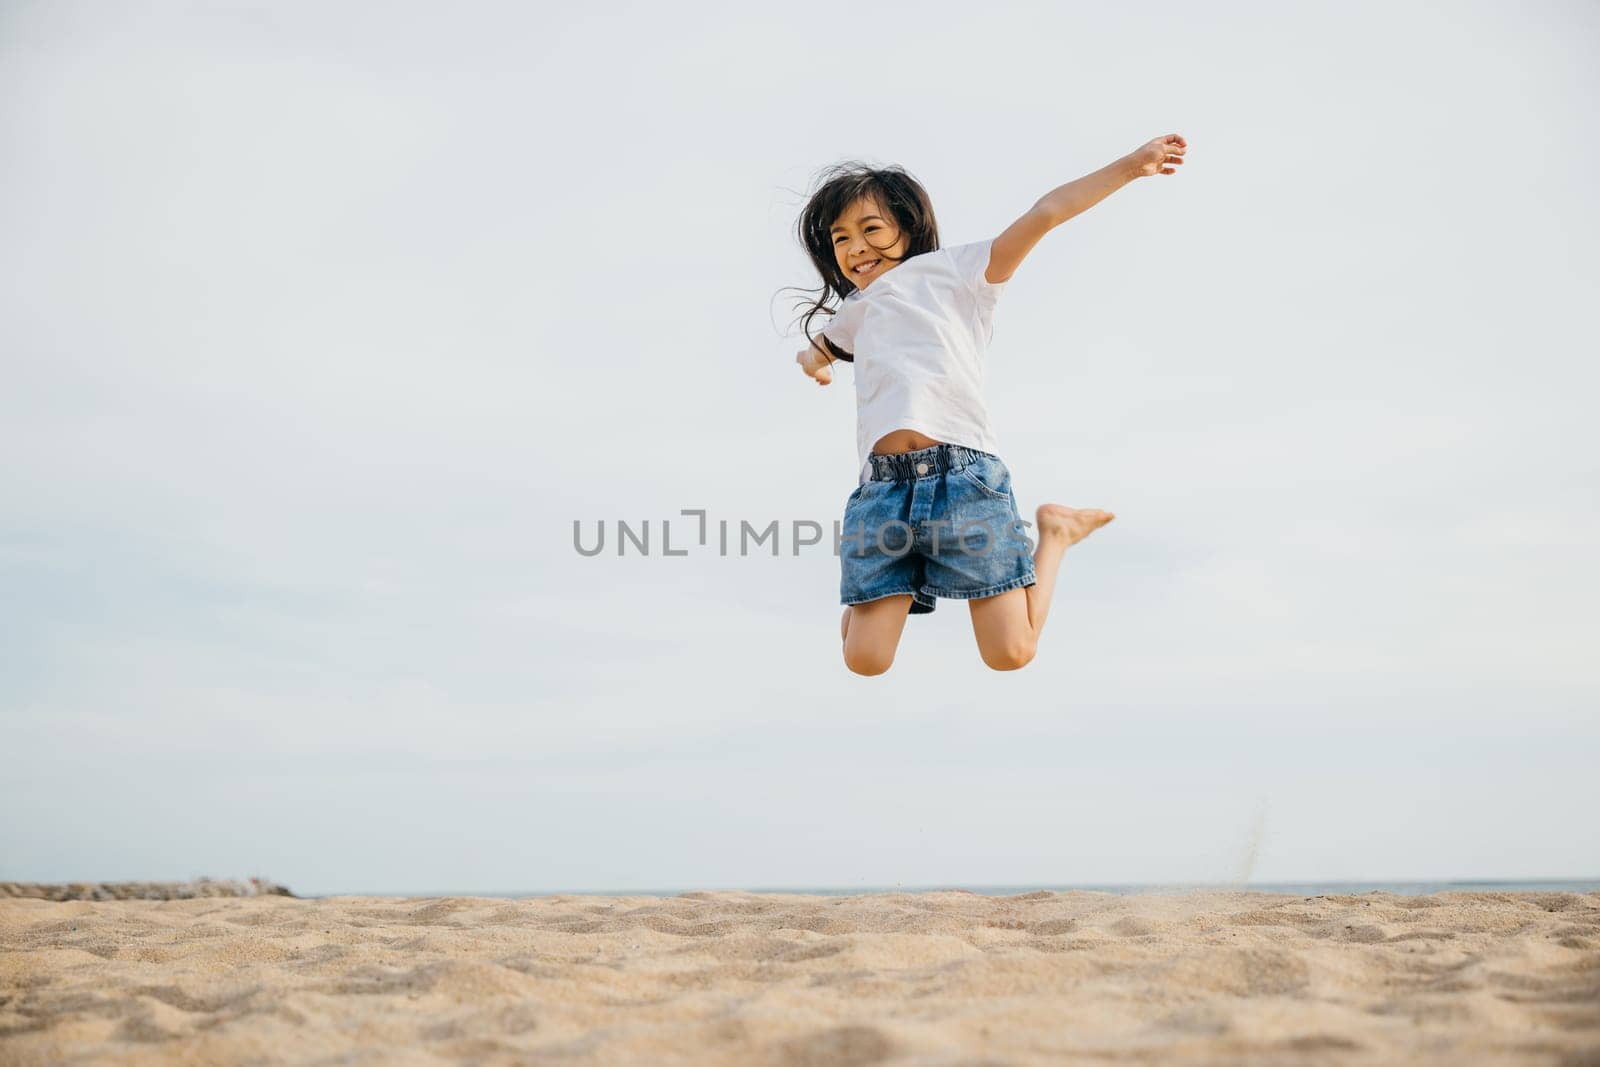 Portrait of a small girl jumping on the beach filled with joy and excitement. Playful motion vitality and the beauty of the Caribbean captured in this cheerful moment